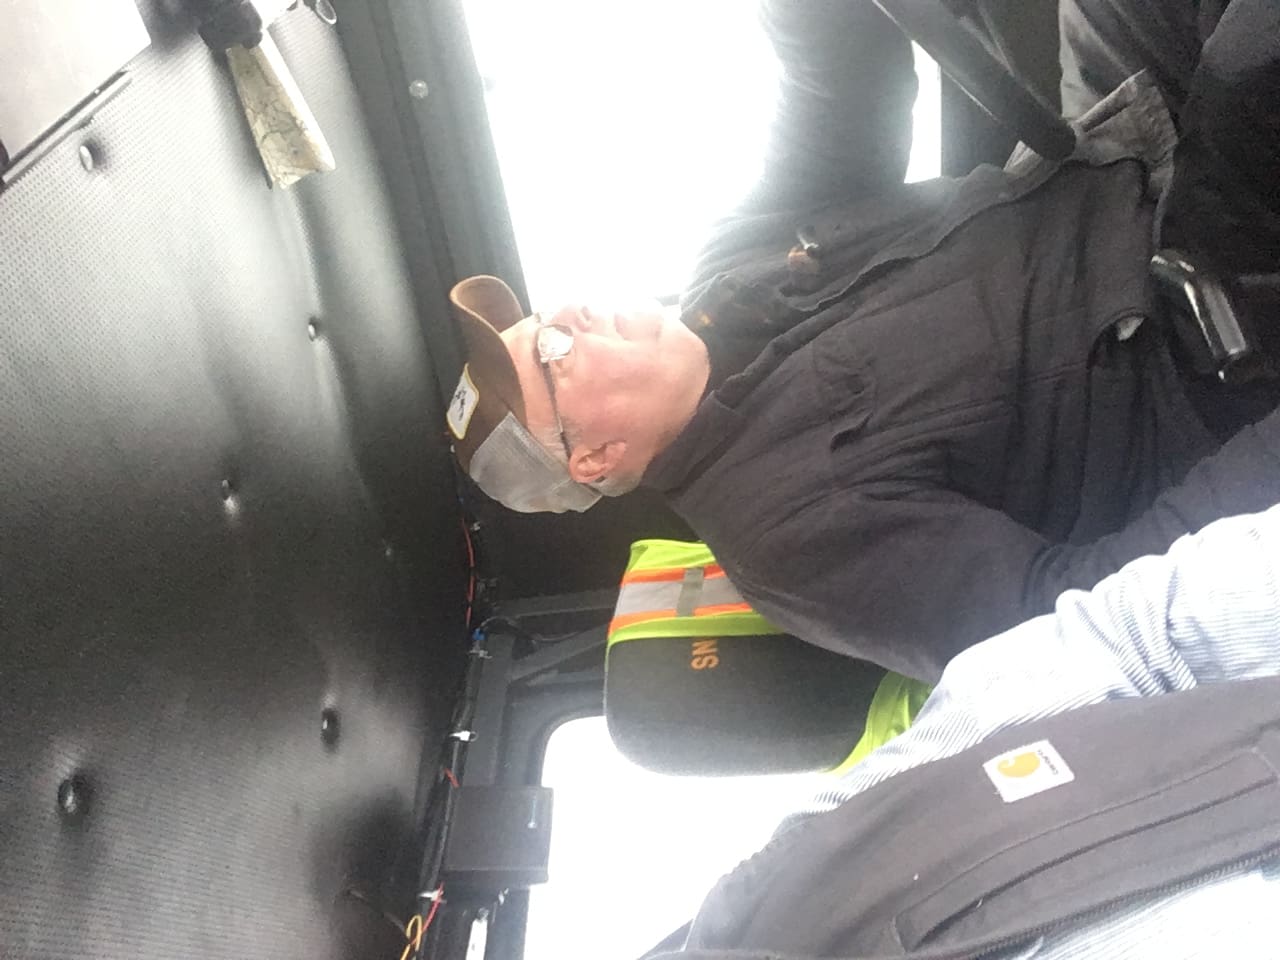 An upside-down image of a man wearing a hat and safety vest, seated and seemingly asleep inside a vehicle.